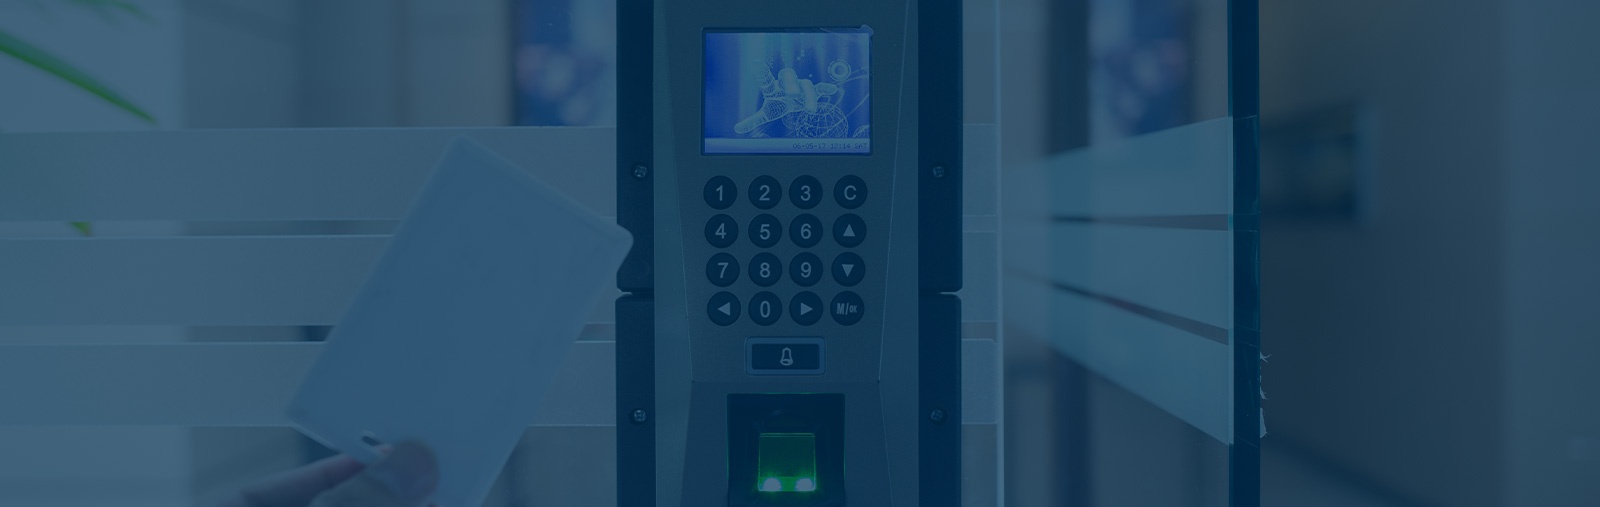 Access Control, Automatic Doors & Security Camera Installation in Etobicoke, ON